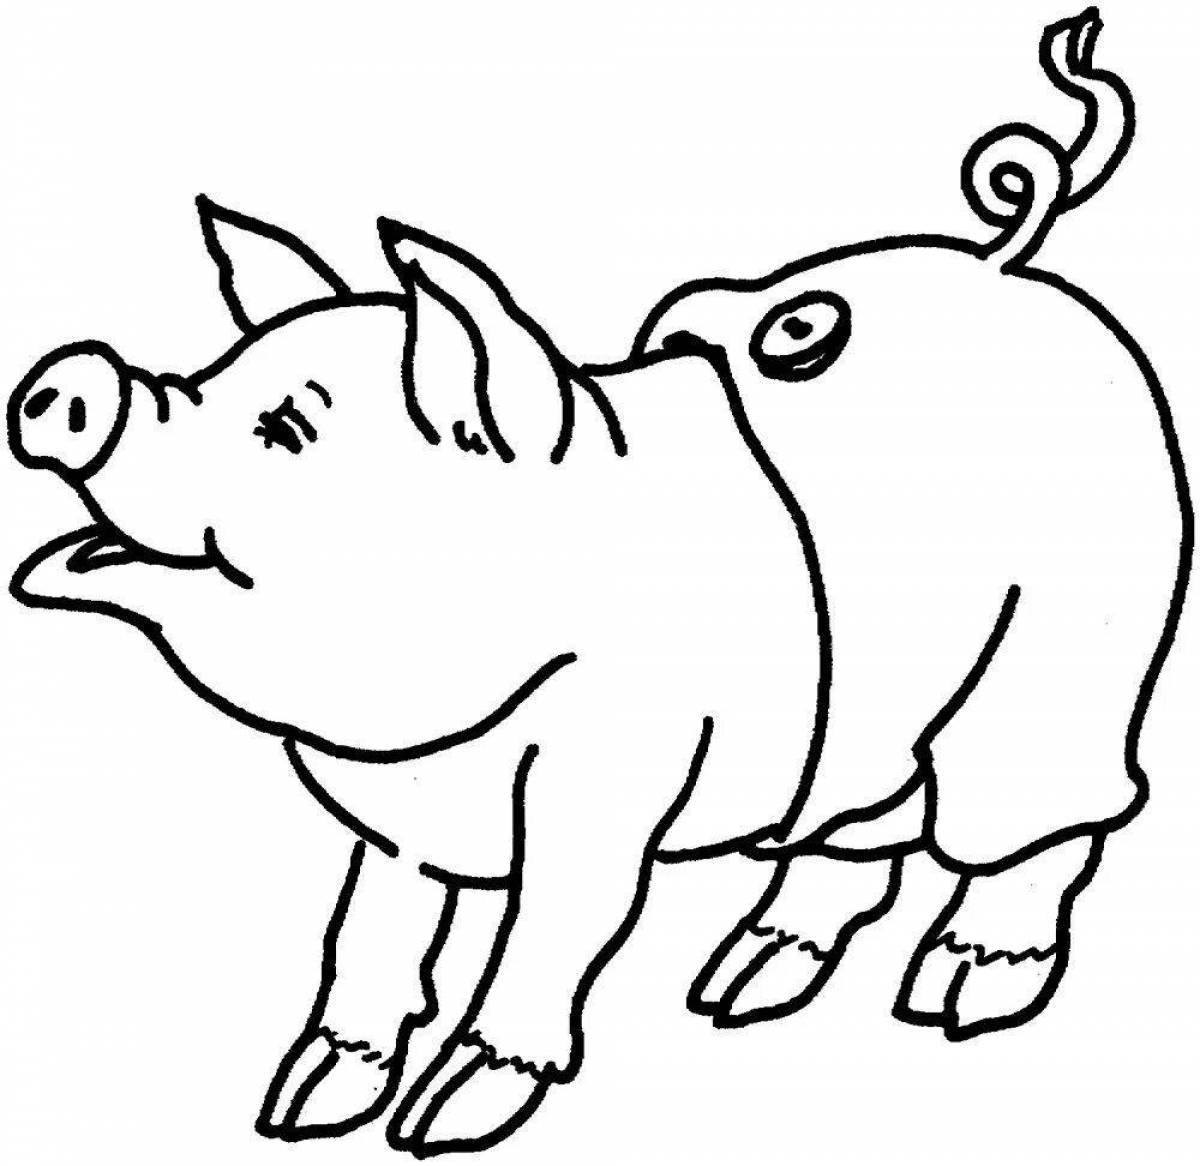 Fairytale coloring pig for kids